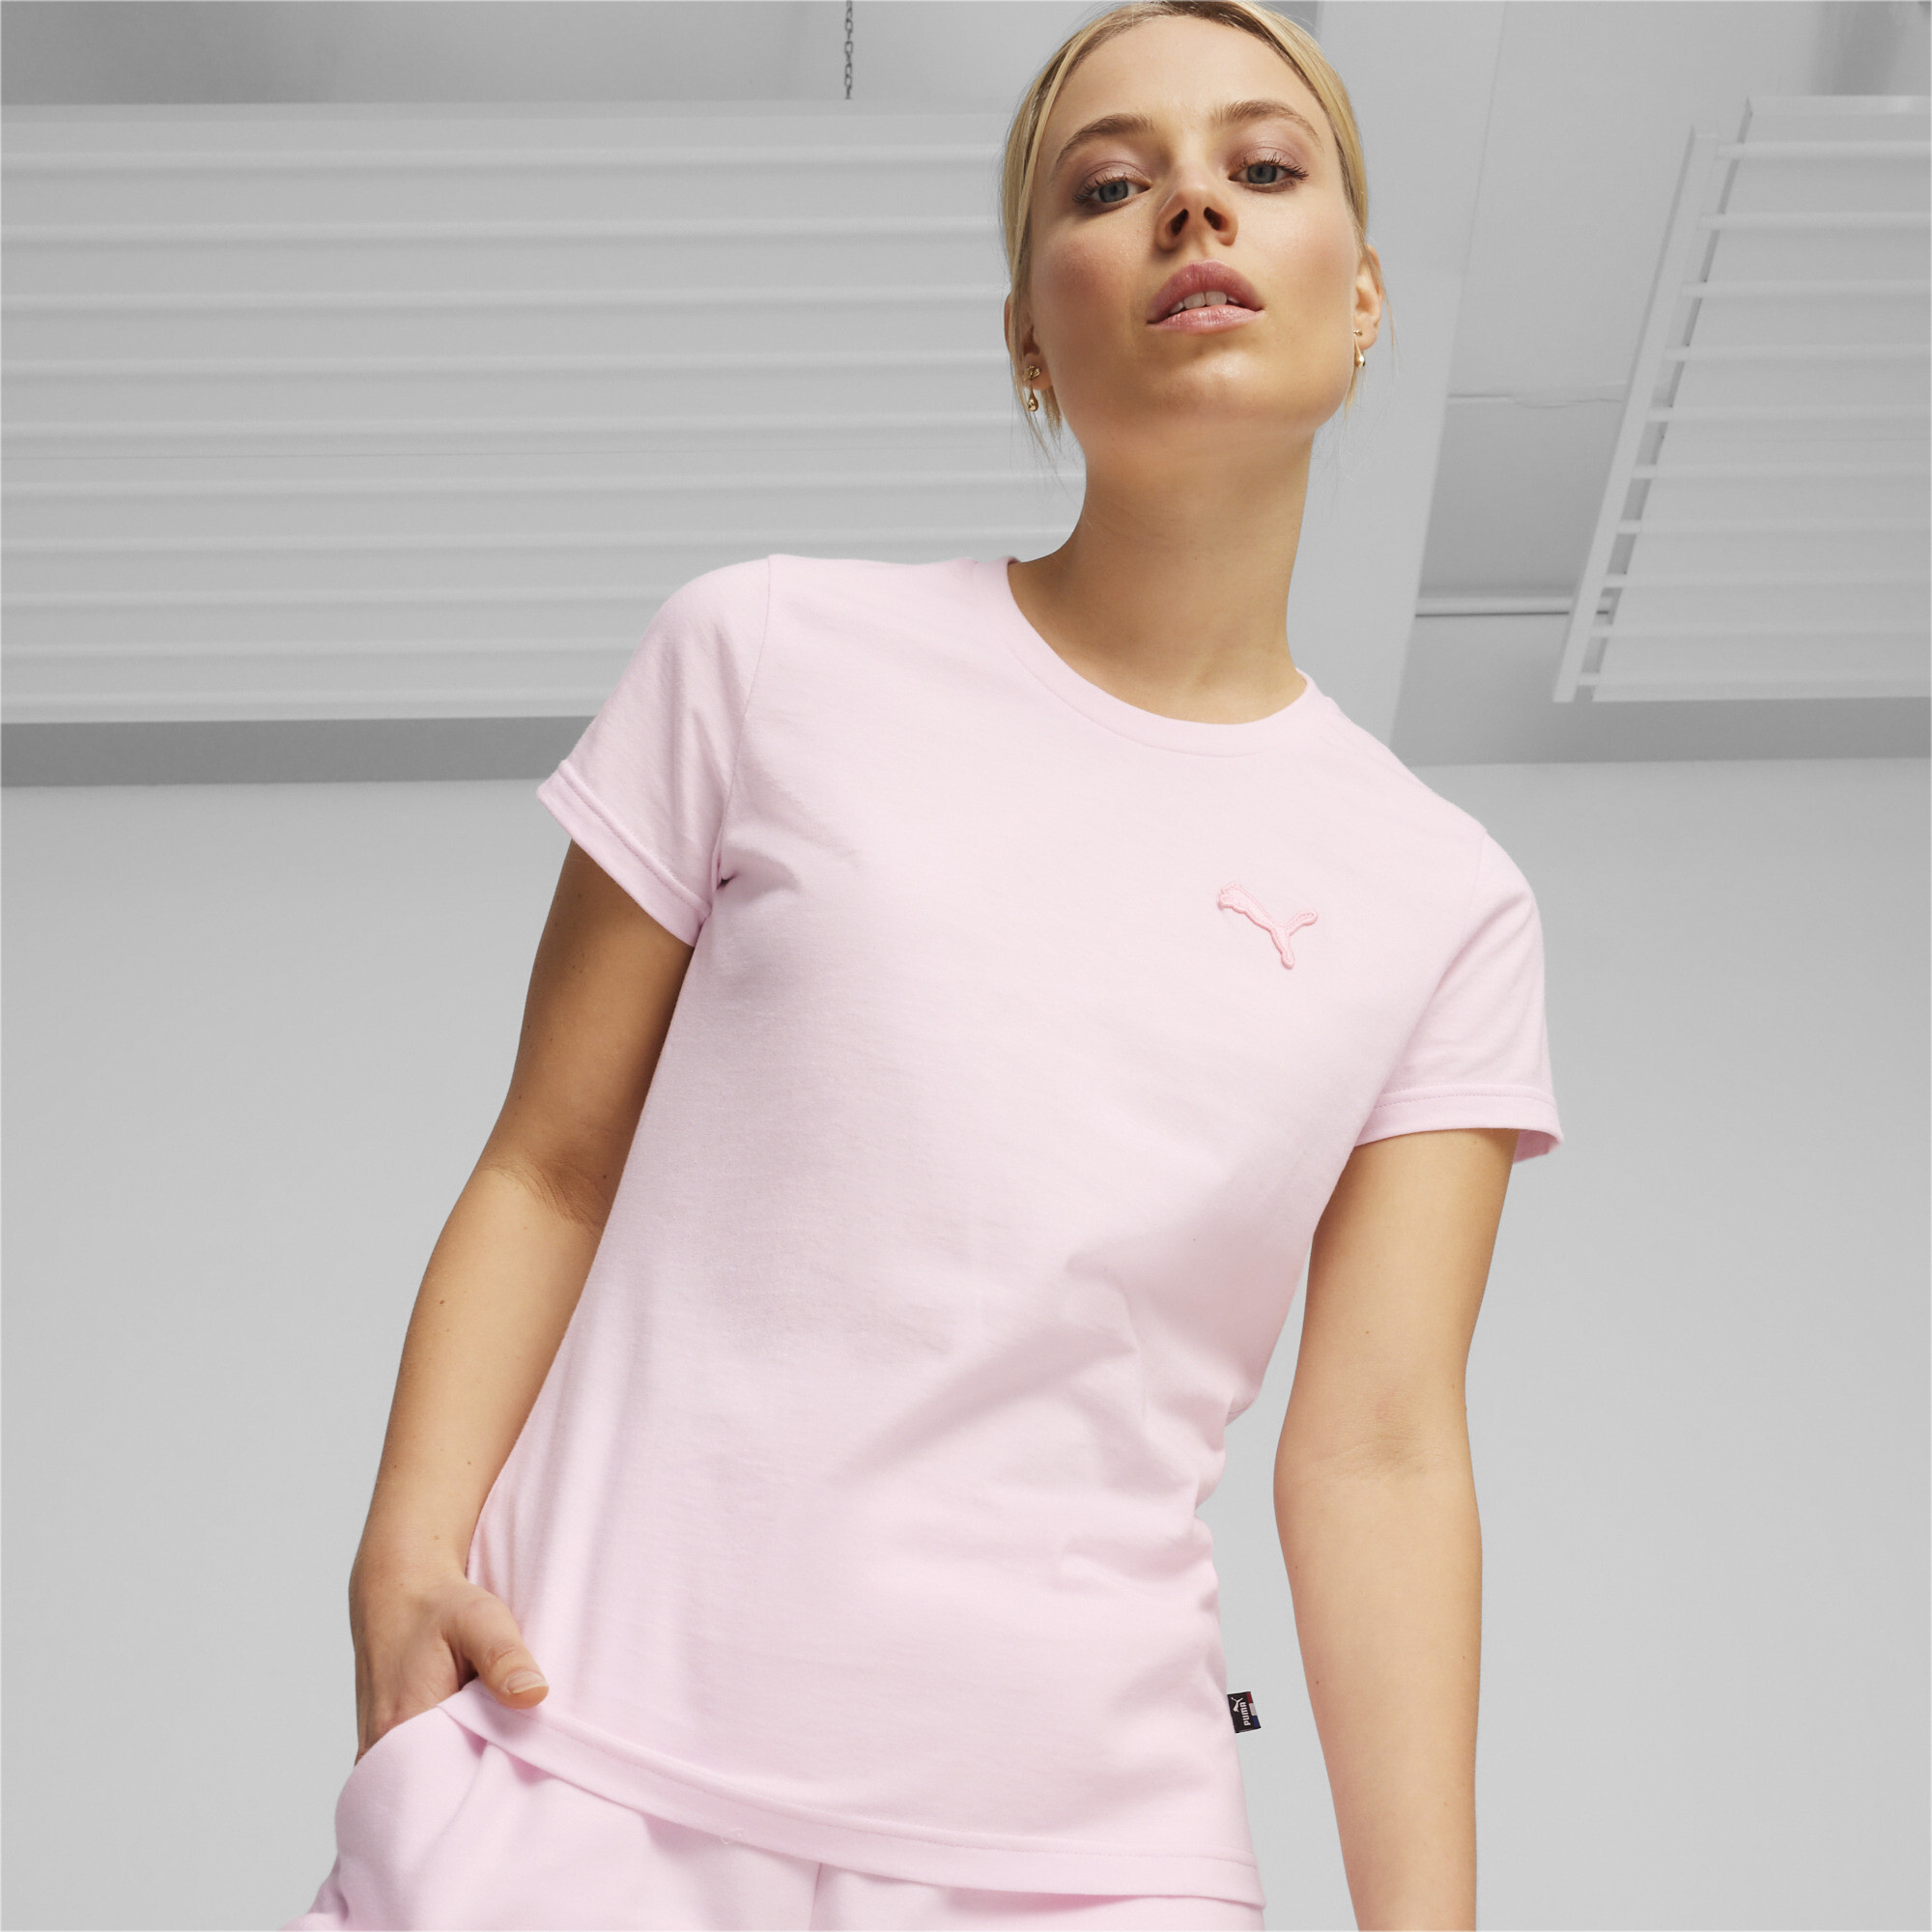 Women's Puma Made In France's T-Shirt, Pink, Size XS, Clothing